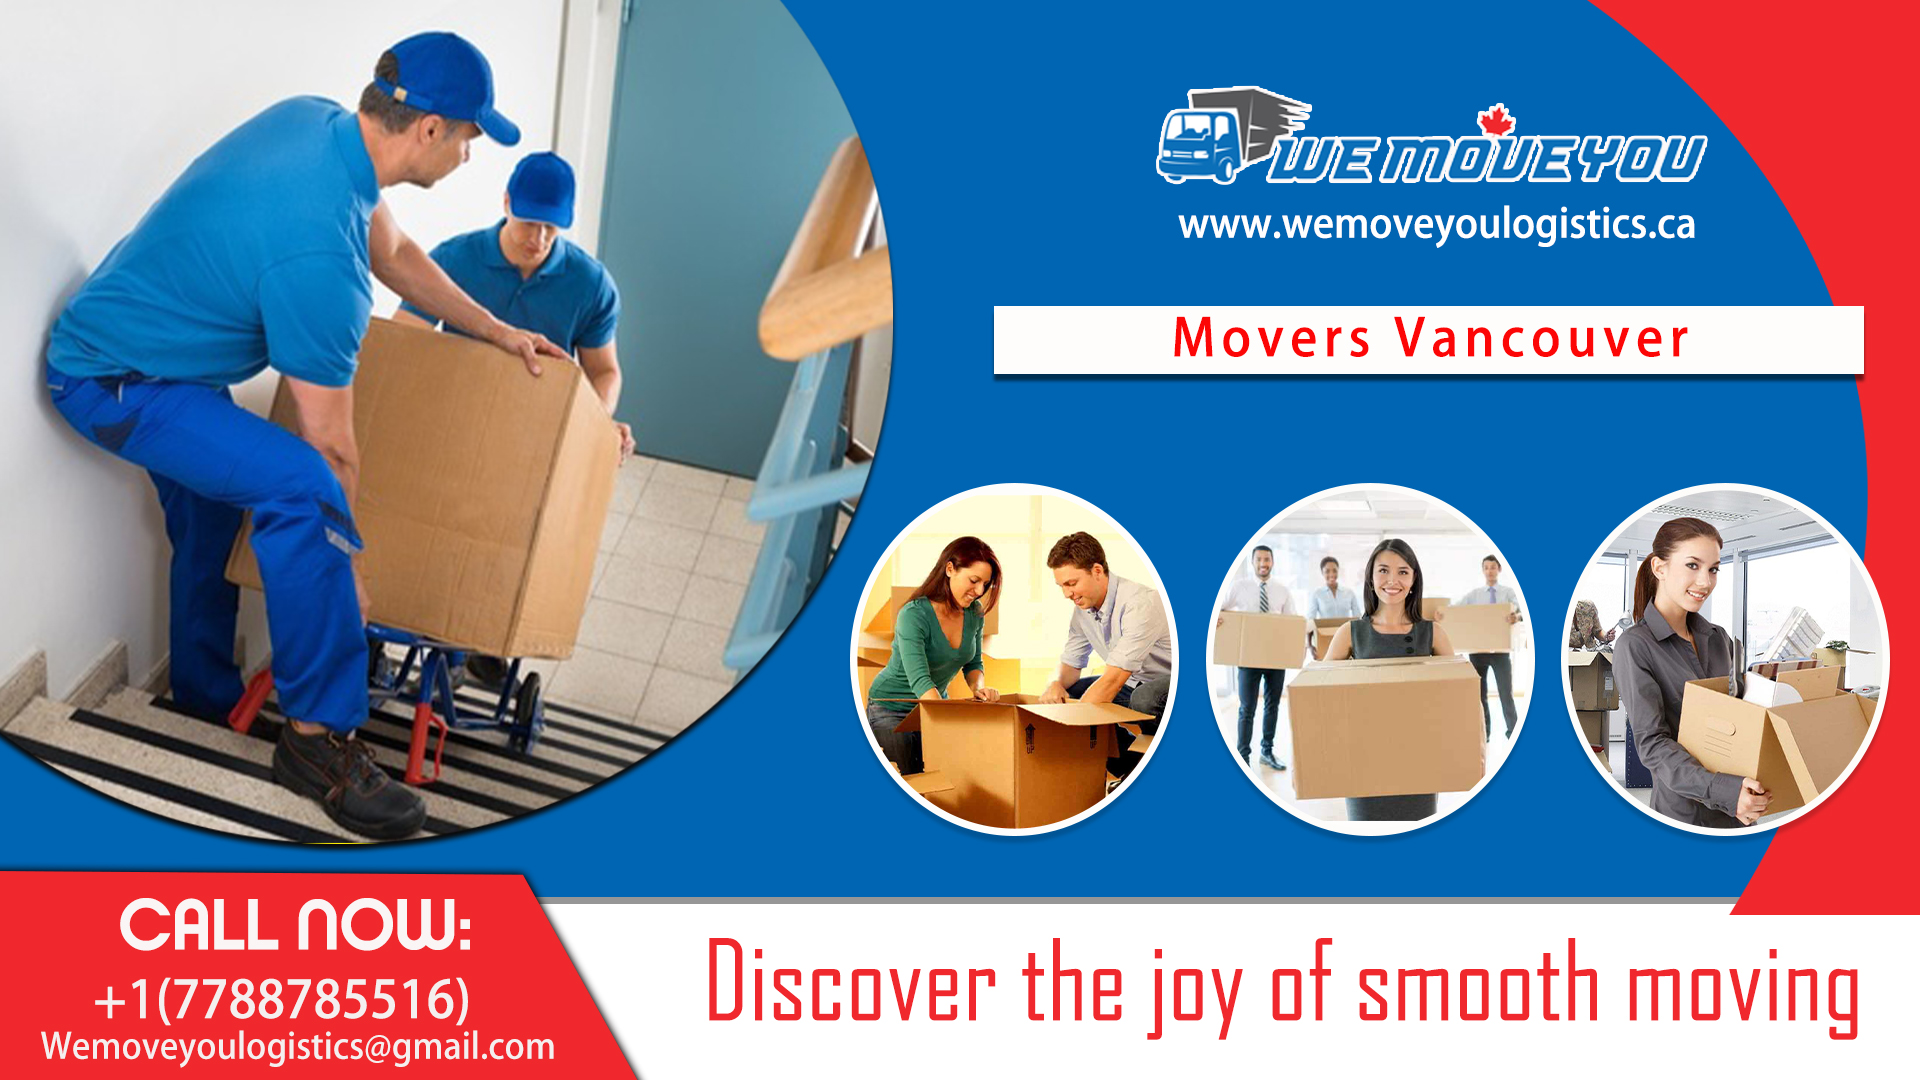 Movers Vancouver | We Move You Logistics | Packers and Movers